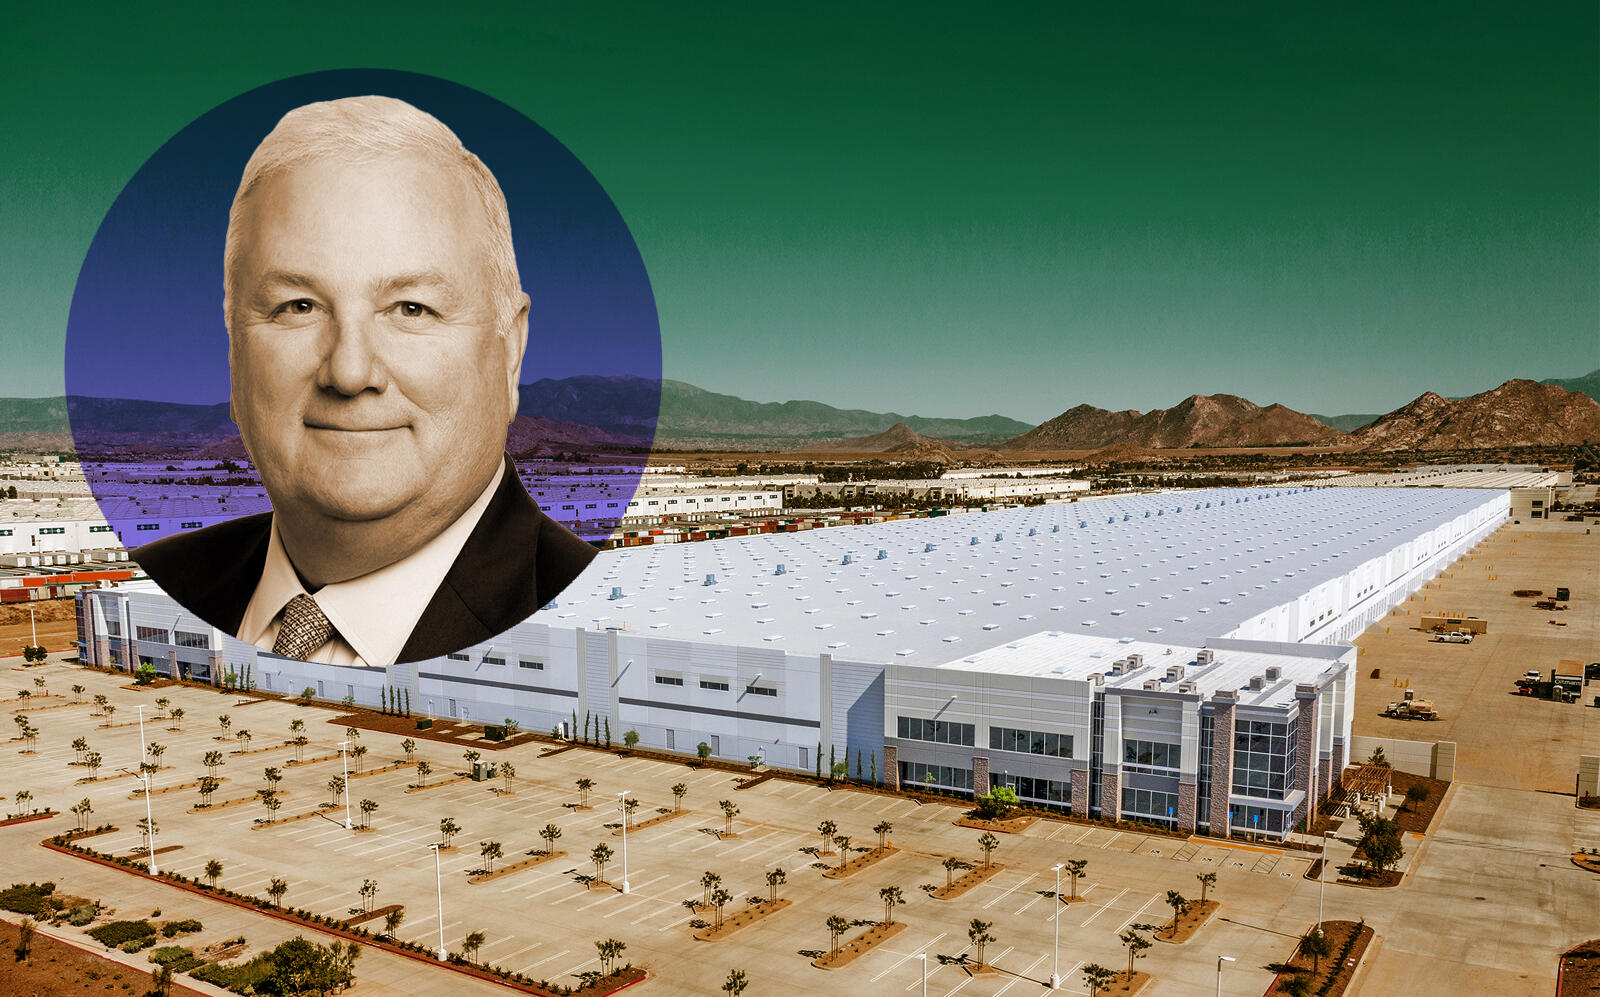 The Perris warehouse and Duke Realty CEO James Connor (Duke Realty)